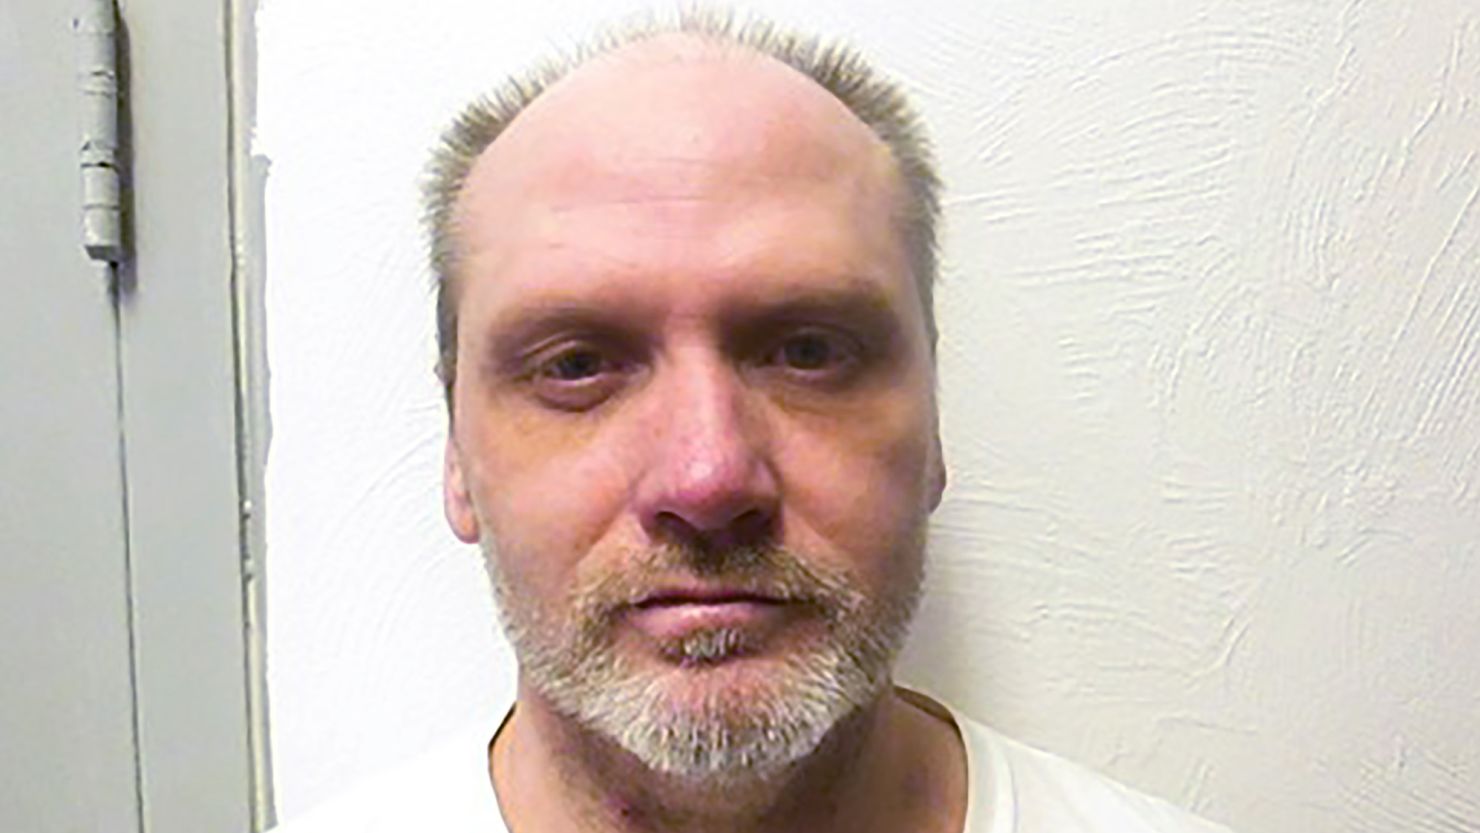 James Coddington, seen in this February 2021 photo from the Oklahoma Department of Corrections, is due to be executed Thursday.